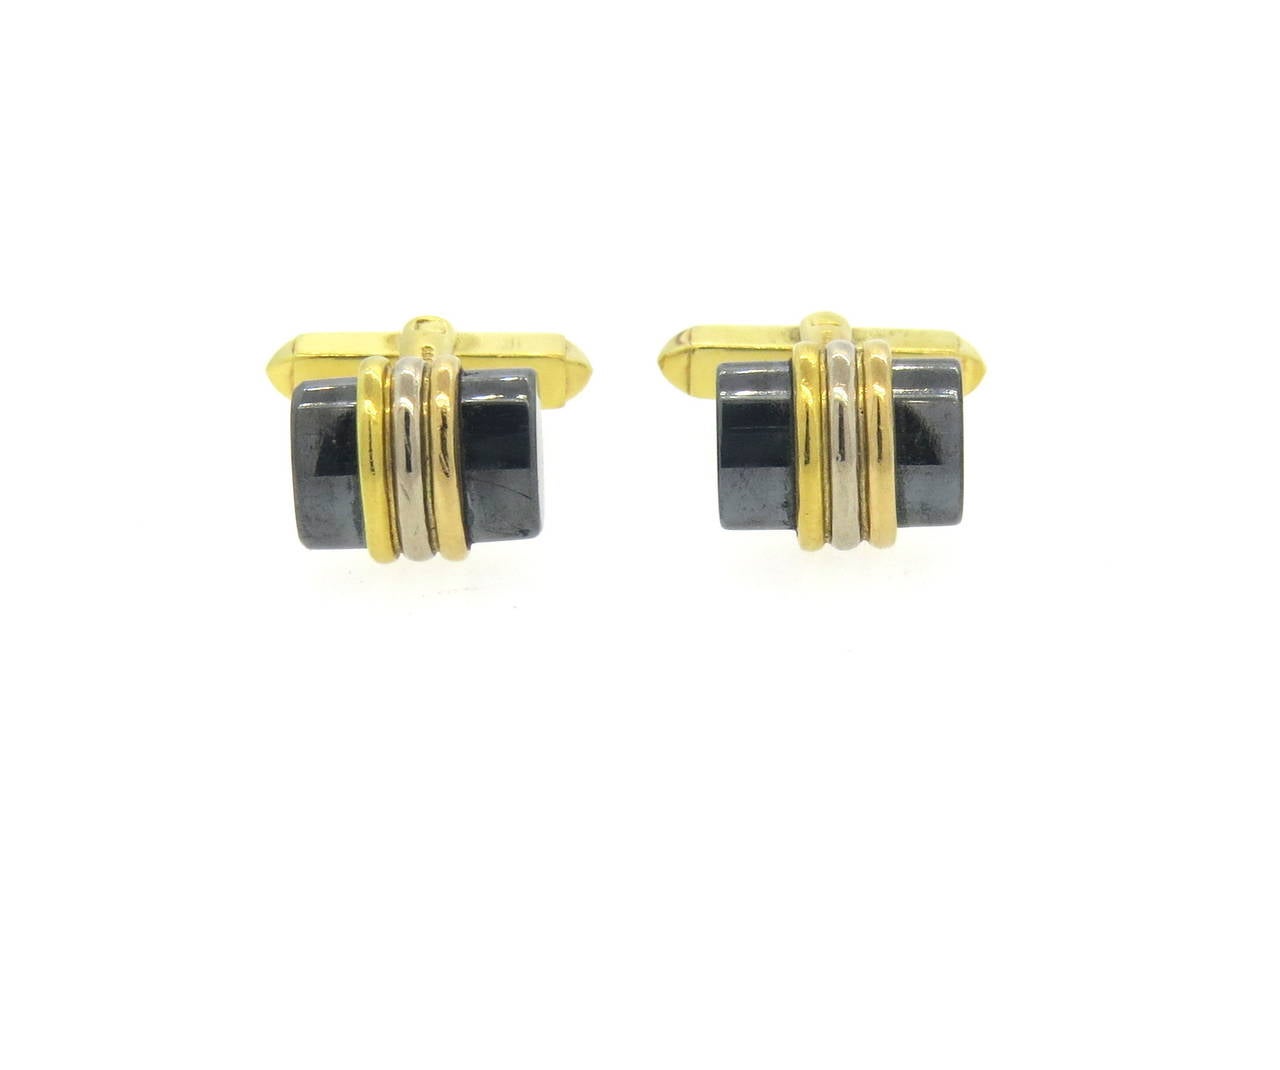 18k yellow, white and rose gold cufflinks, crafted by Deakin & Francis, set with hematite. Top measures 14mm x 11mm. Marked D & F and with English gold marks. Weight - 14.8 grams